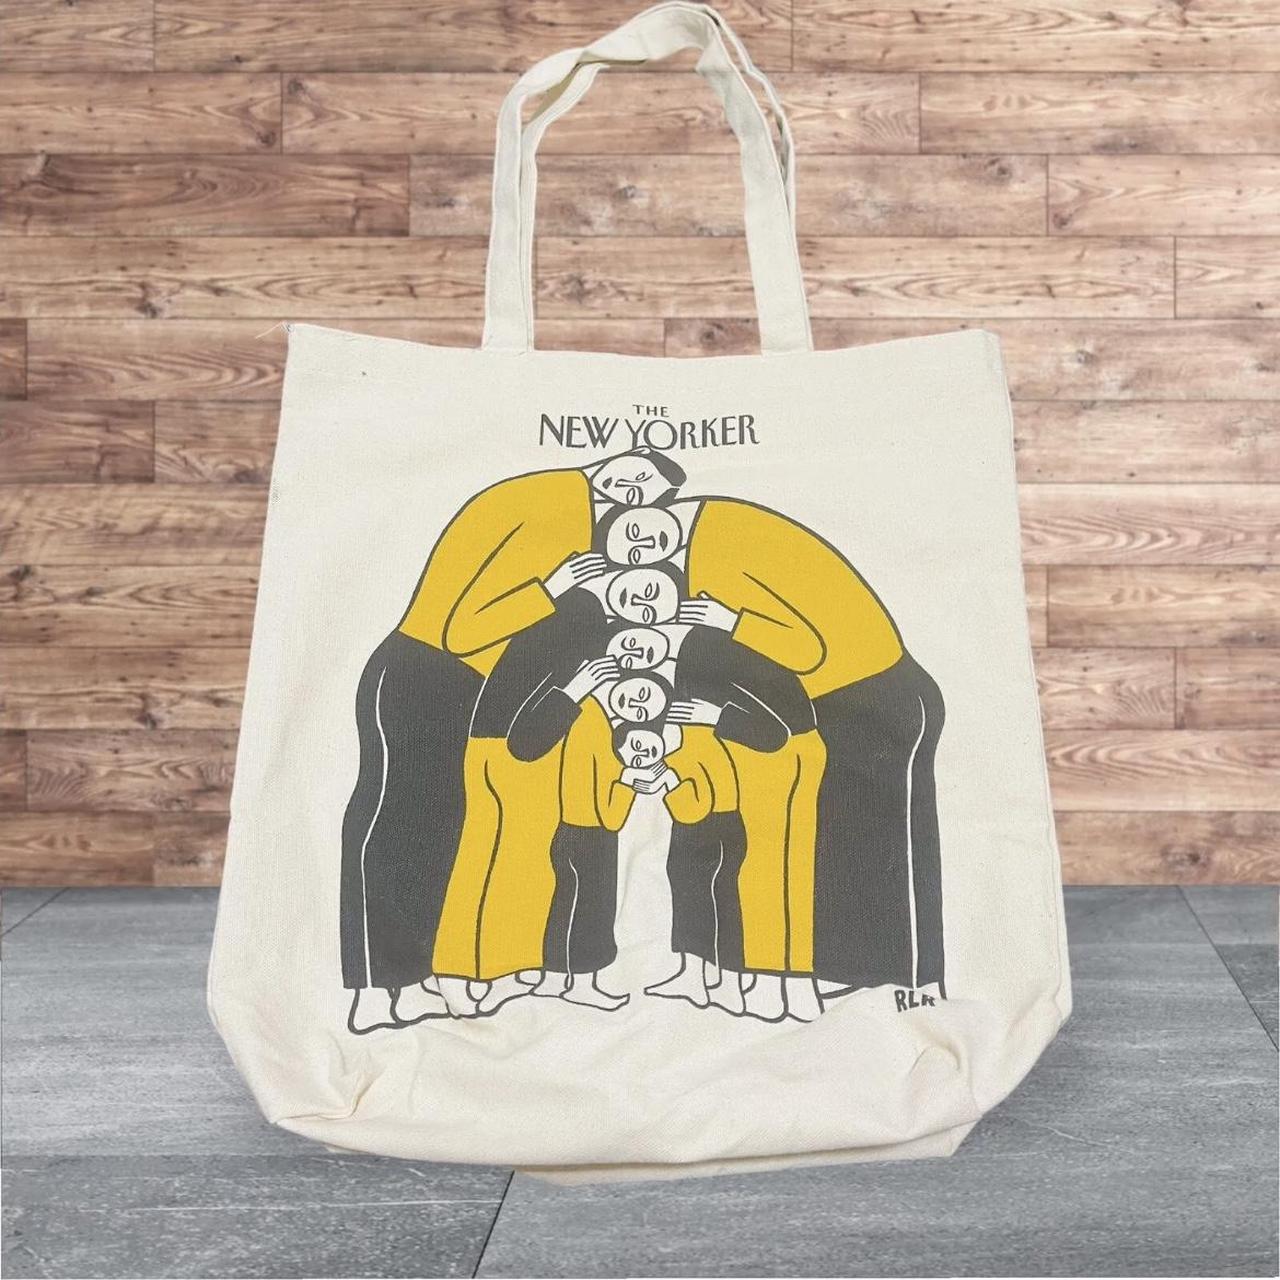 The New Yorker Magazine Canvas Tote Bag Limited Edition | eBay